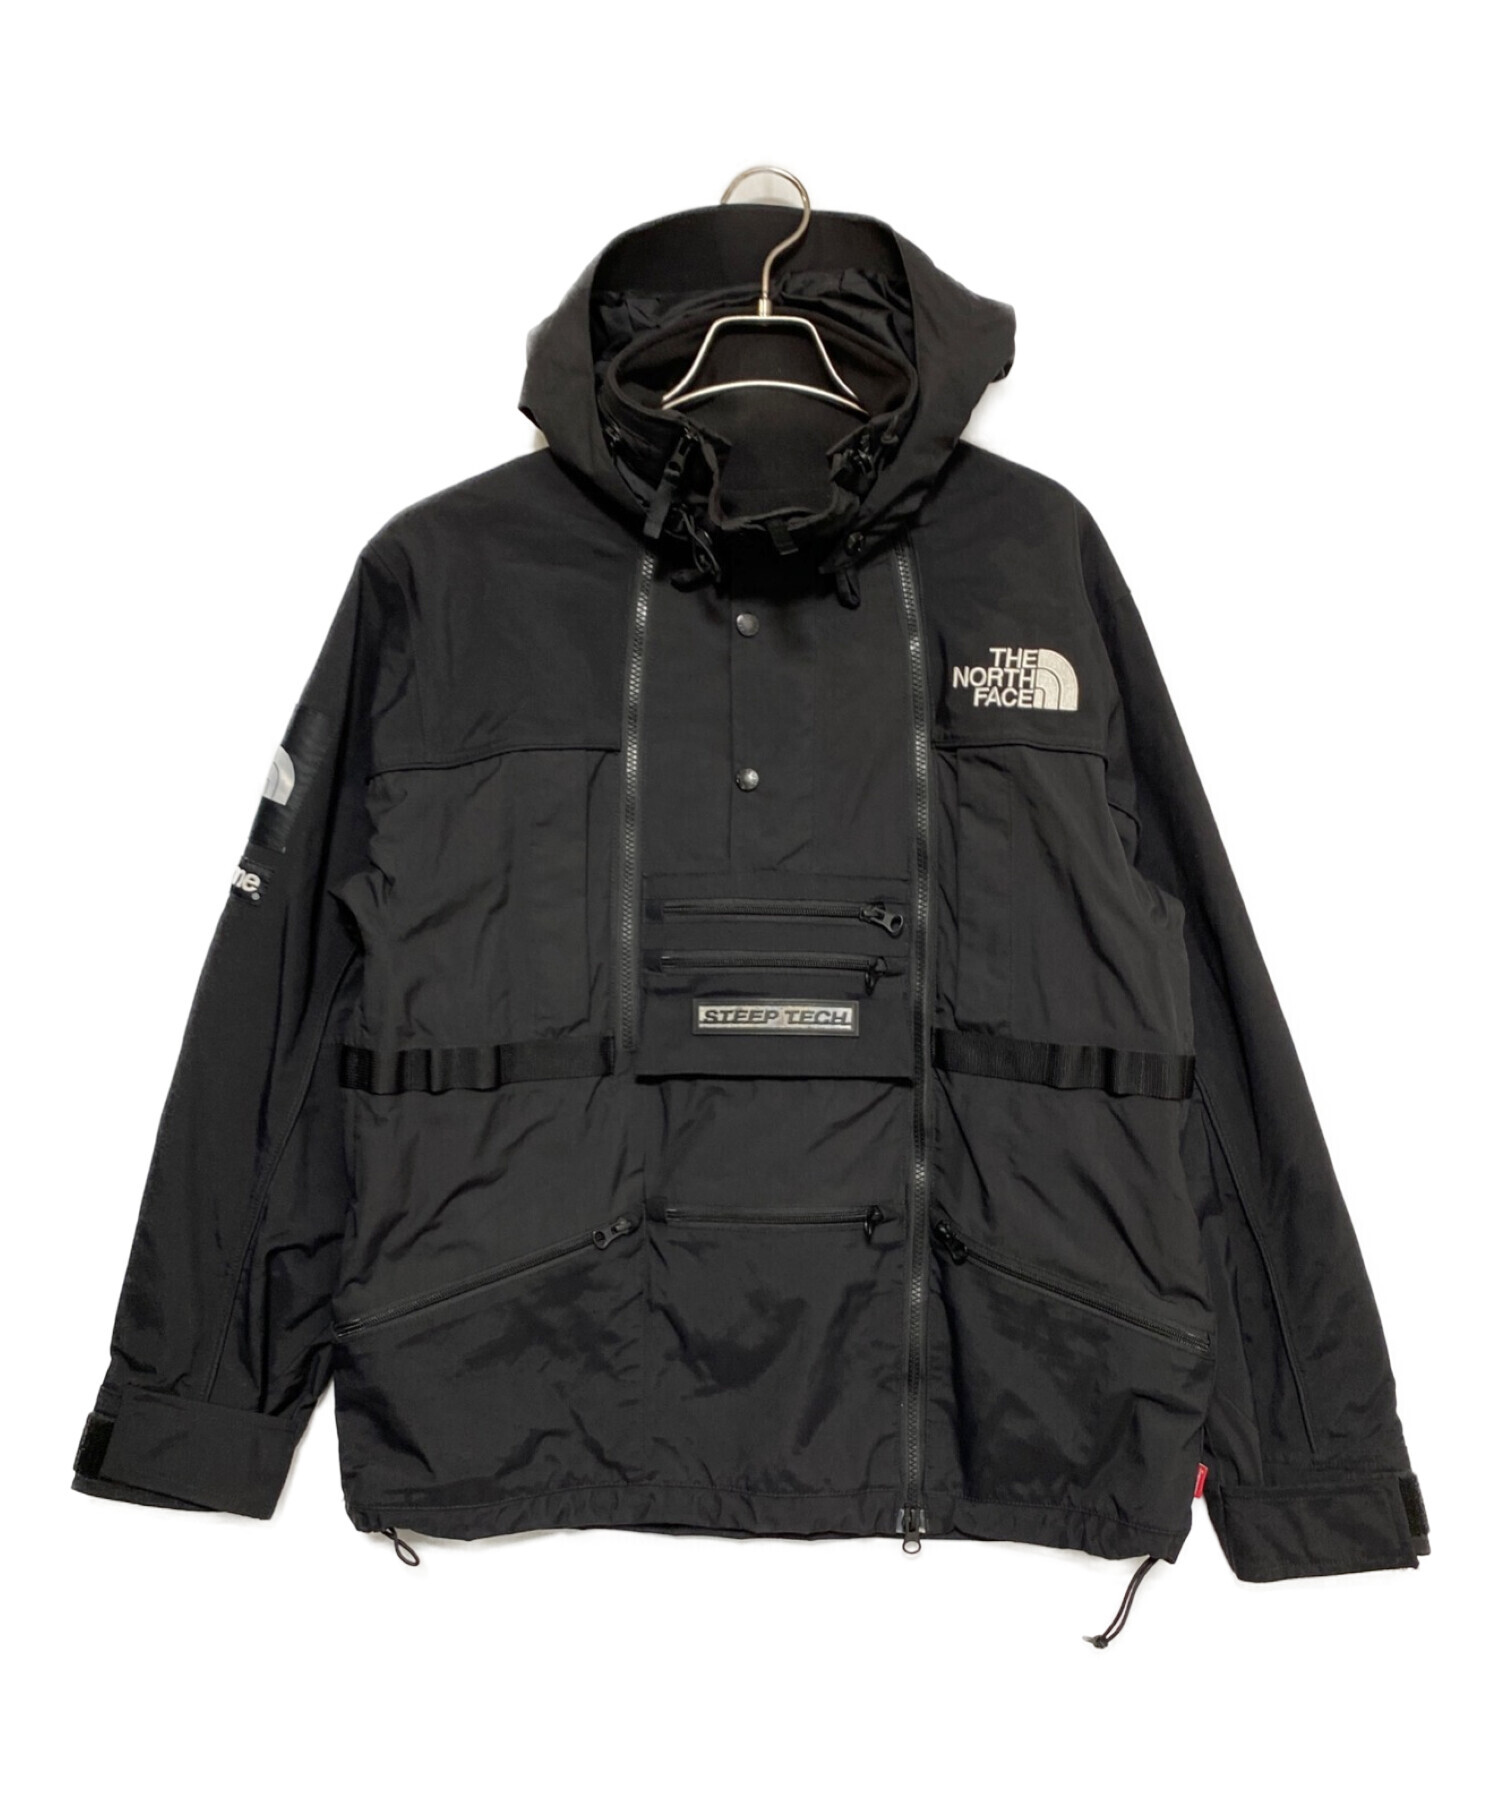 THE NORTH FACE  STEEP TECH size:L